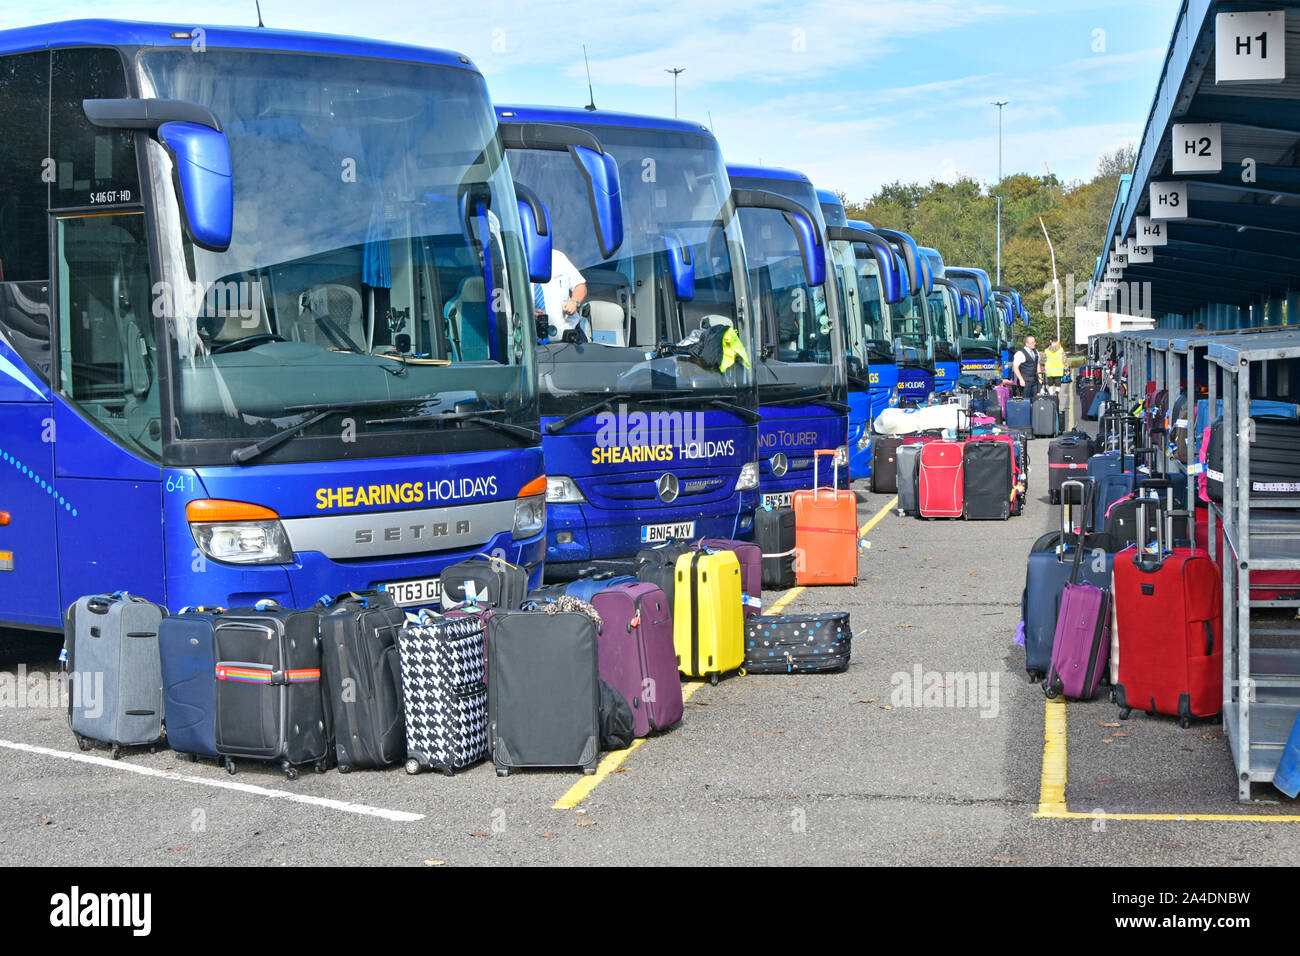 Shearings holiday coaches & suitcases wait sorting & loading at feeder coach interchange London Gateway Scratchwood Services North London England UK Stock Photo